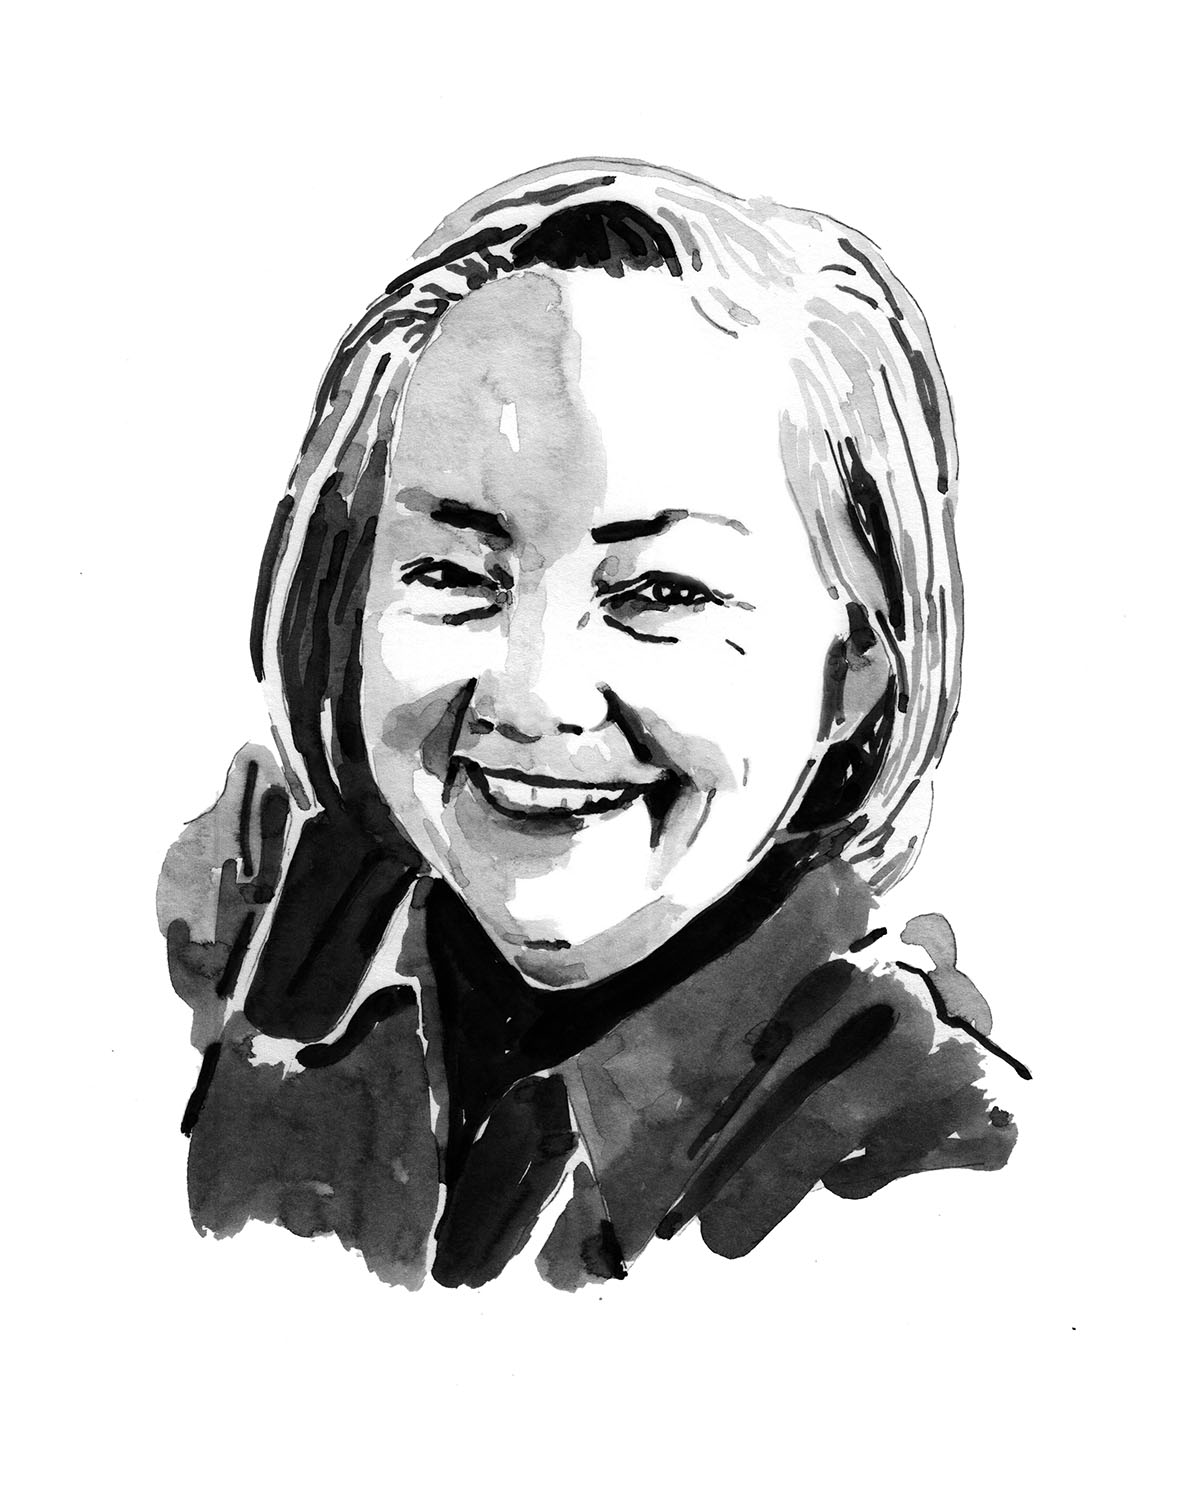 A black and white illustration of a smiling woman